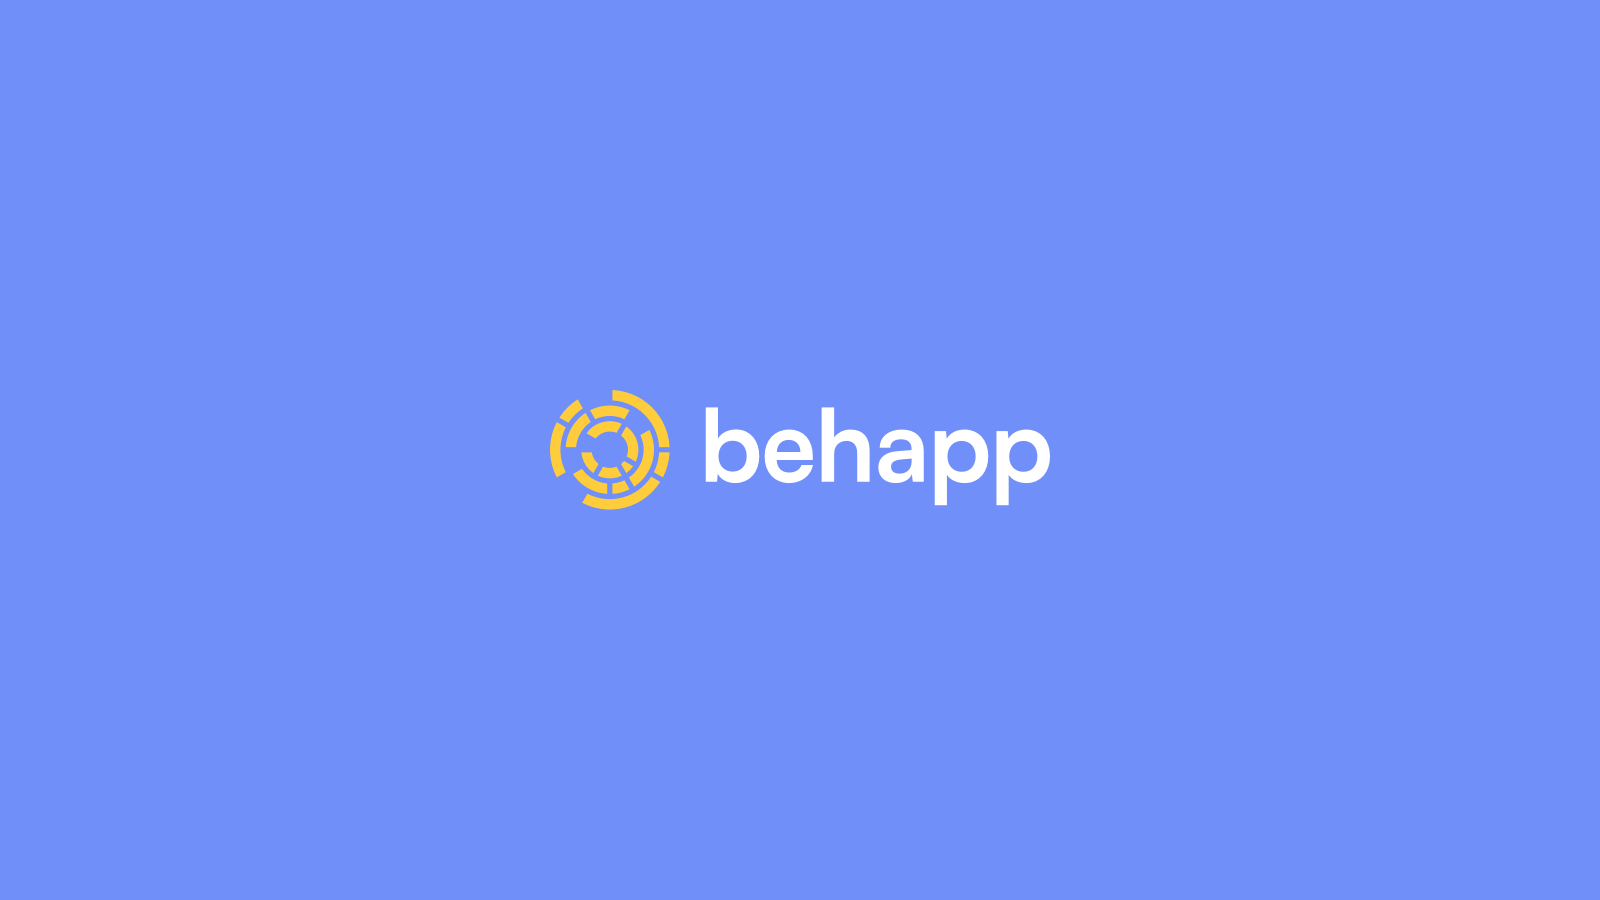 Rebranding Behapp, a research instrument to help map mental health disorders